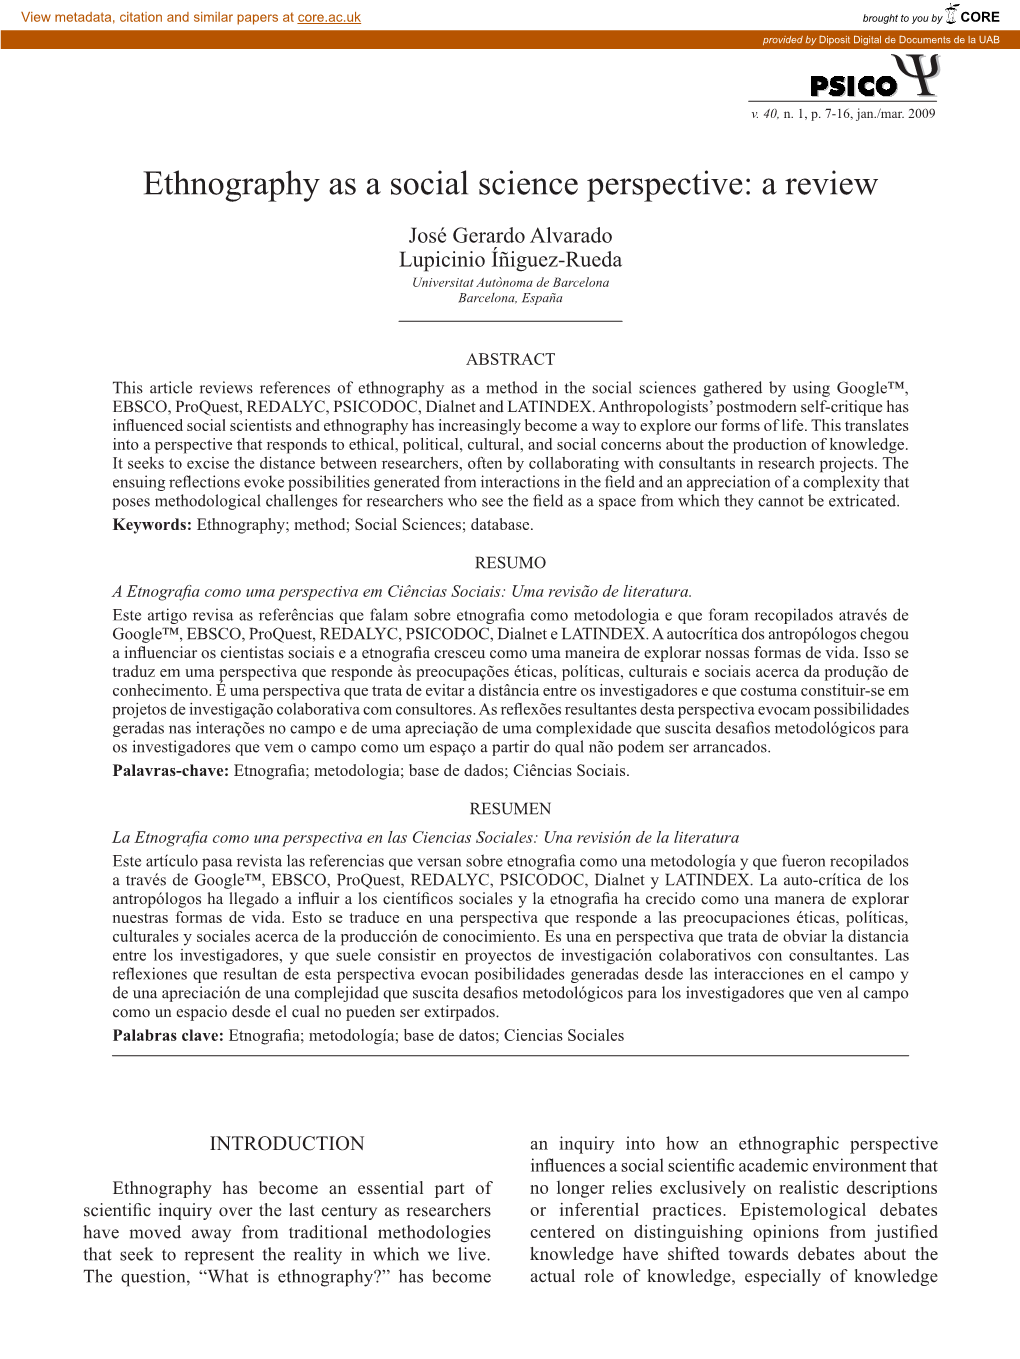 Ethnography As a Social Science Perspective: a Review